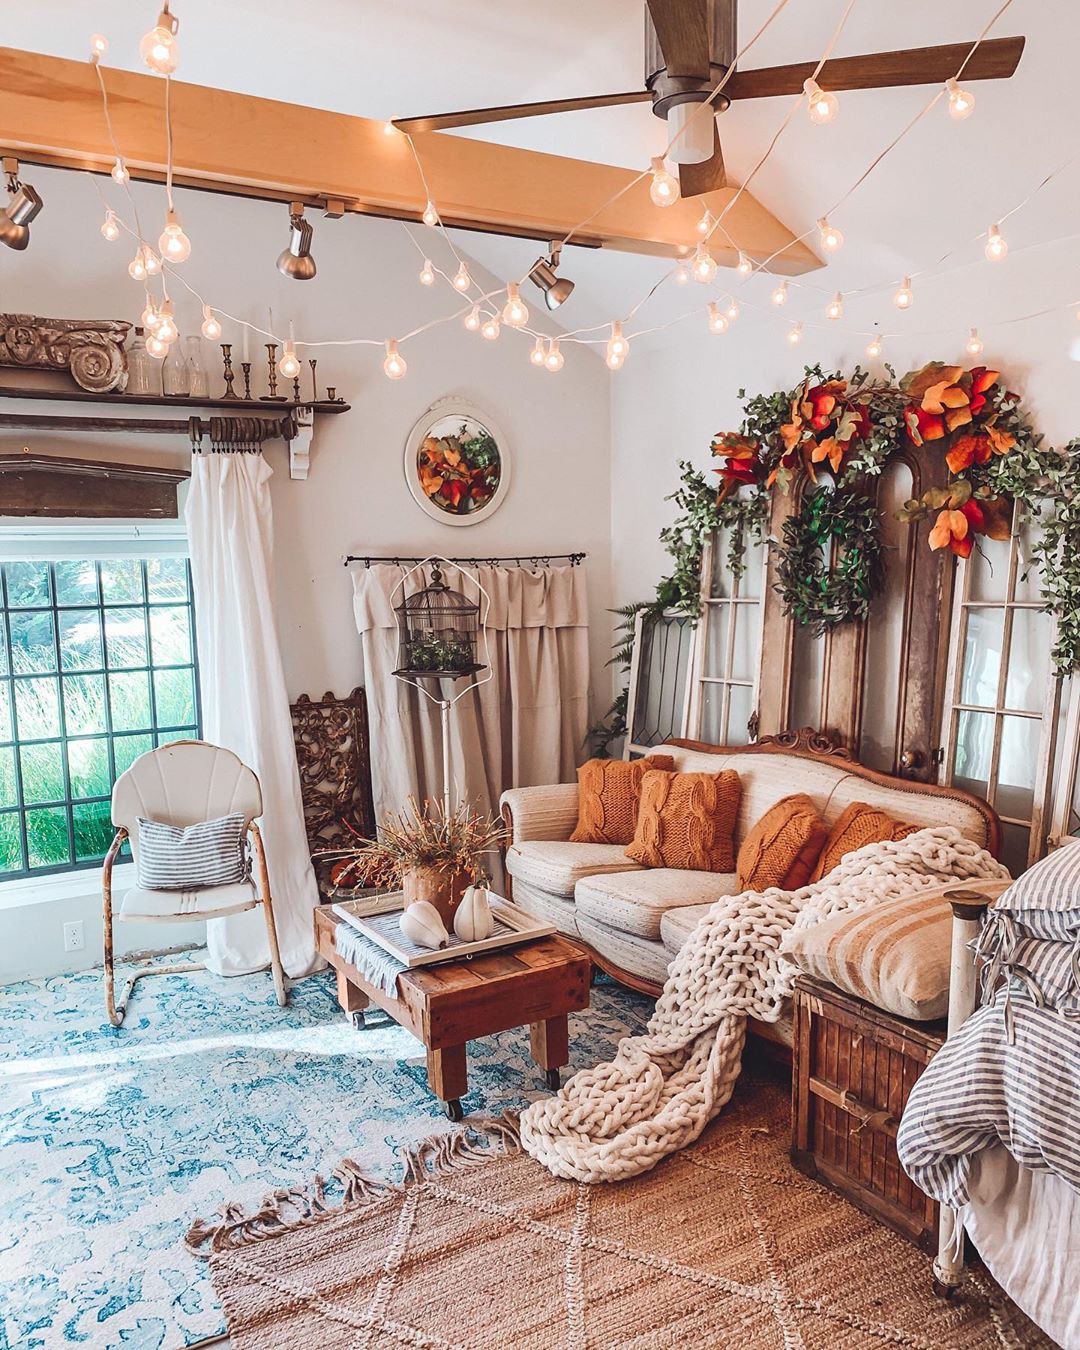 Large She Shed with Classy Furniture and String Lighting Overhead. Photo by Instagram user @fleur_at_home